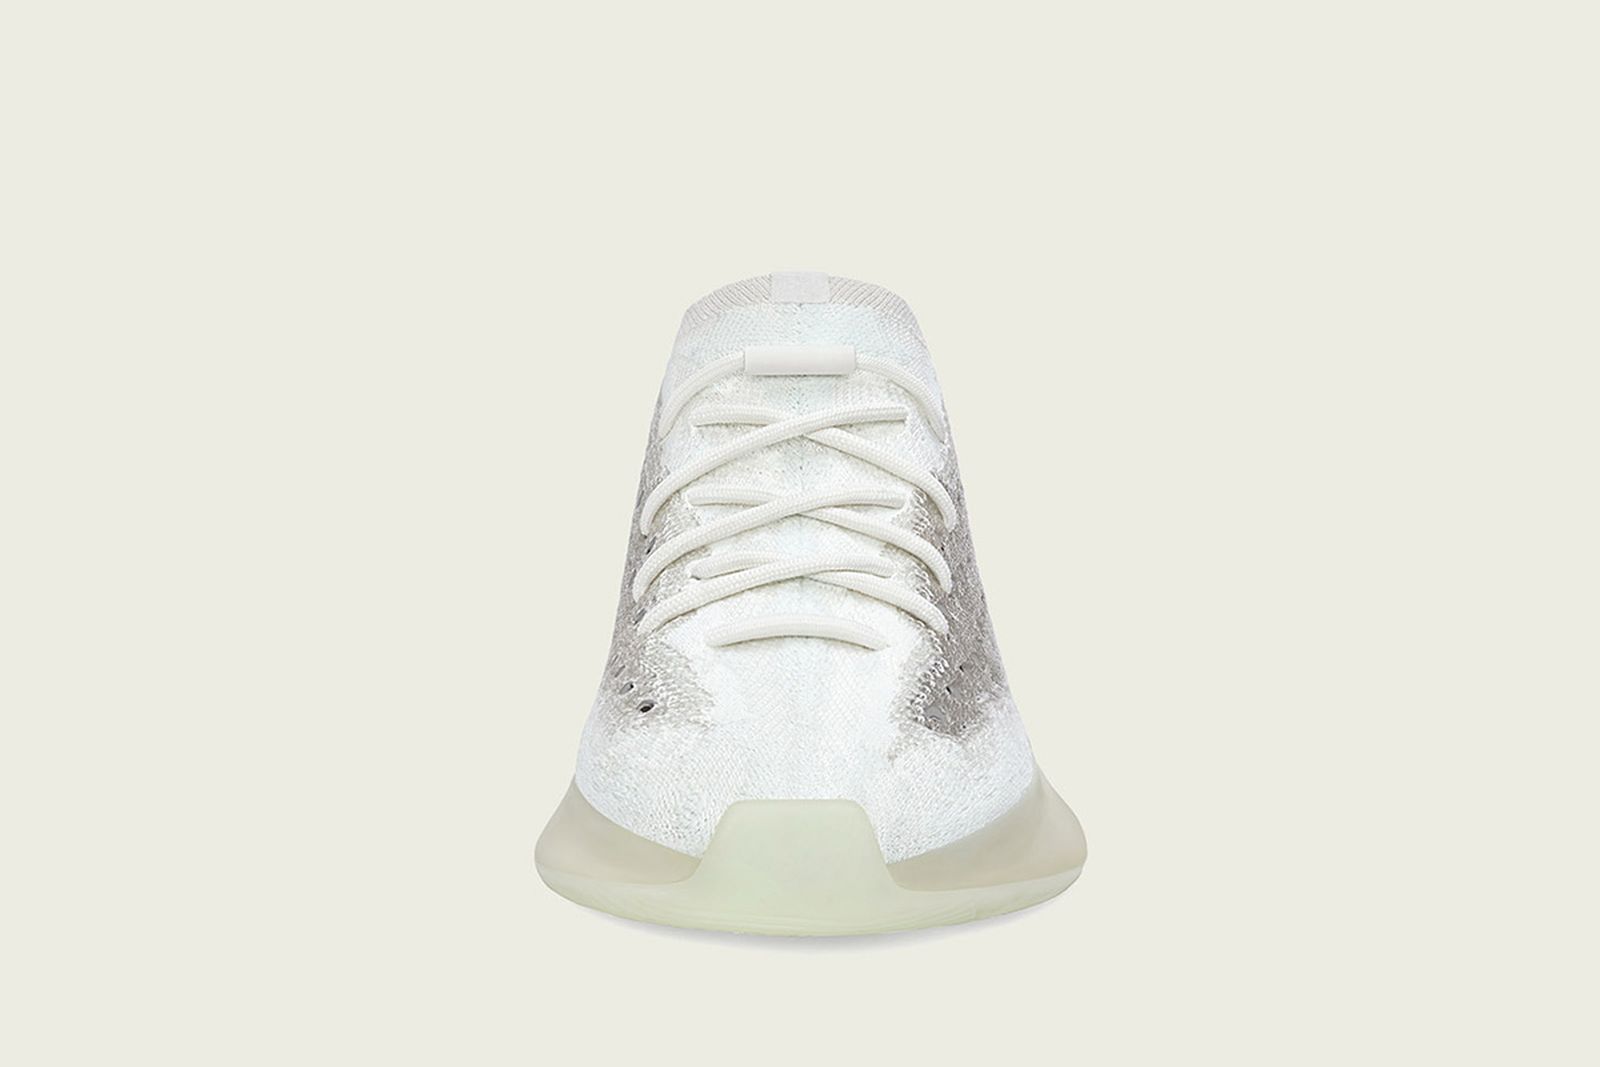 adidas YEEZY Boost 380 Calcite: Official Images & Release Info